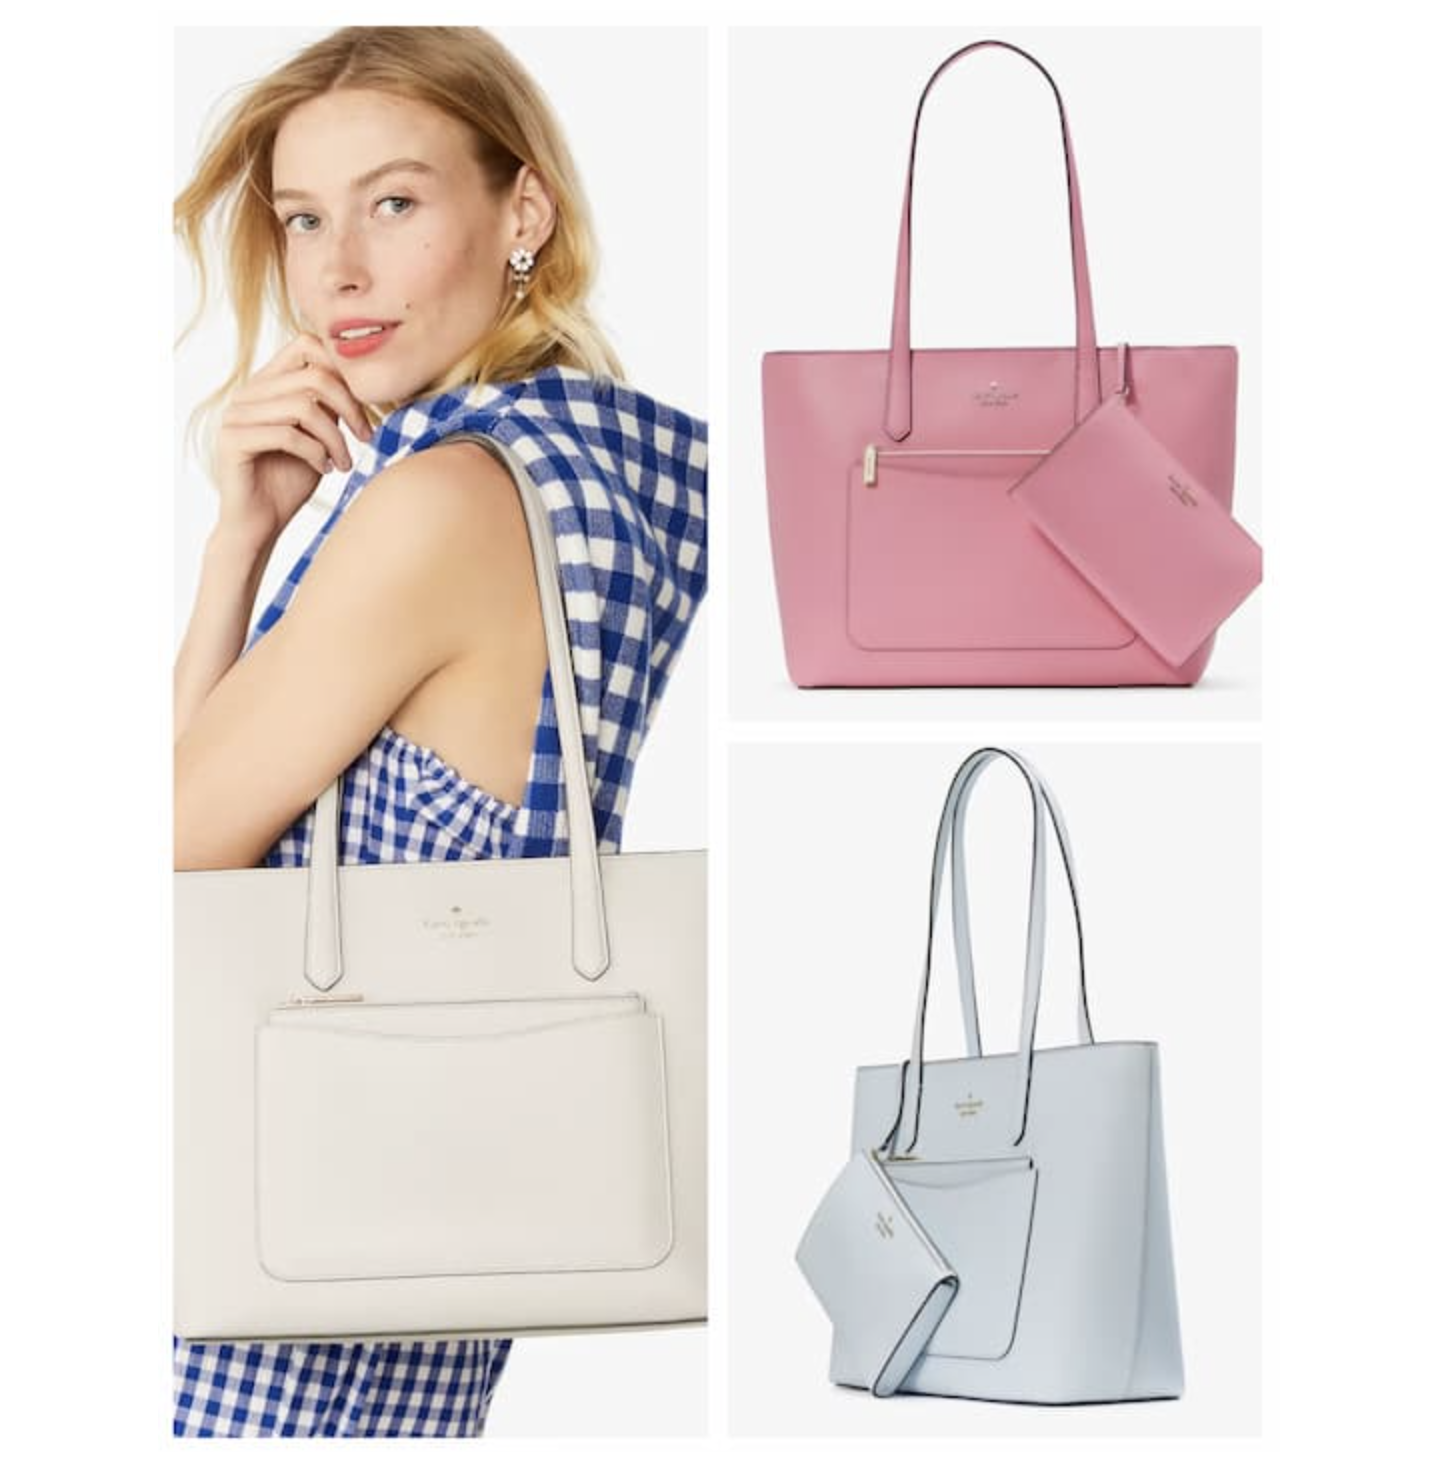 *HOT* Kate Spade Staci Tote and Wristlet Set for simply $99 shipped! (Reg. $500)